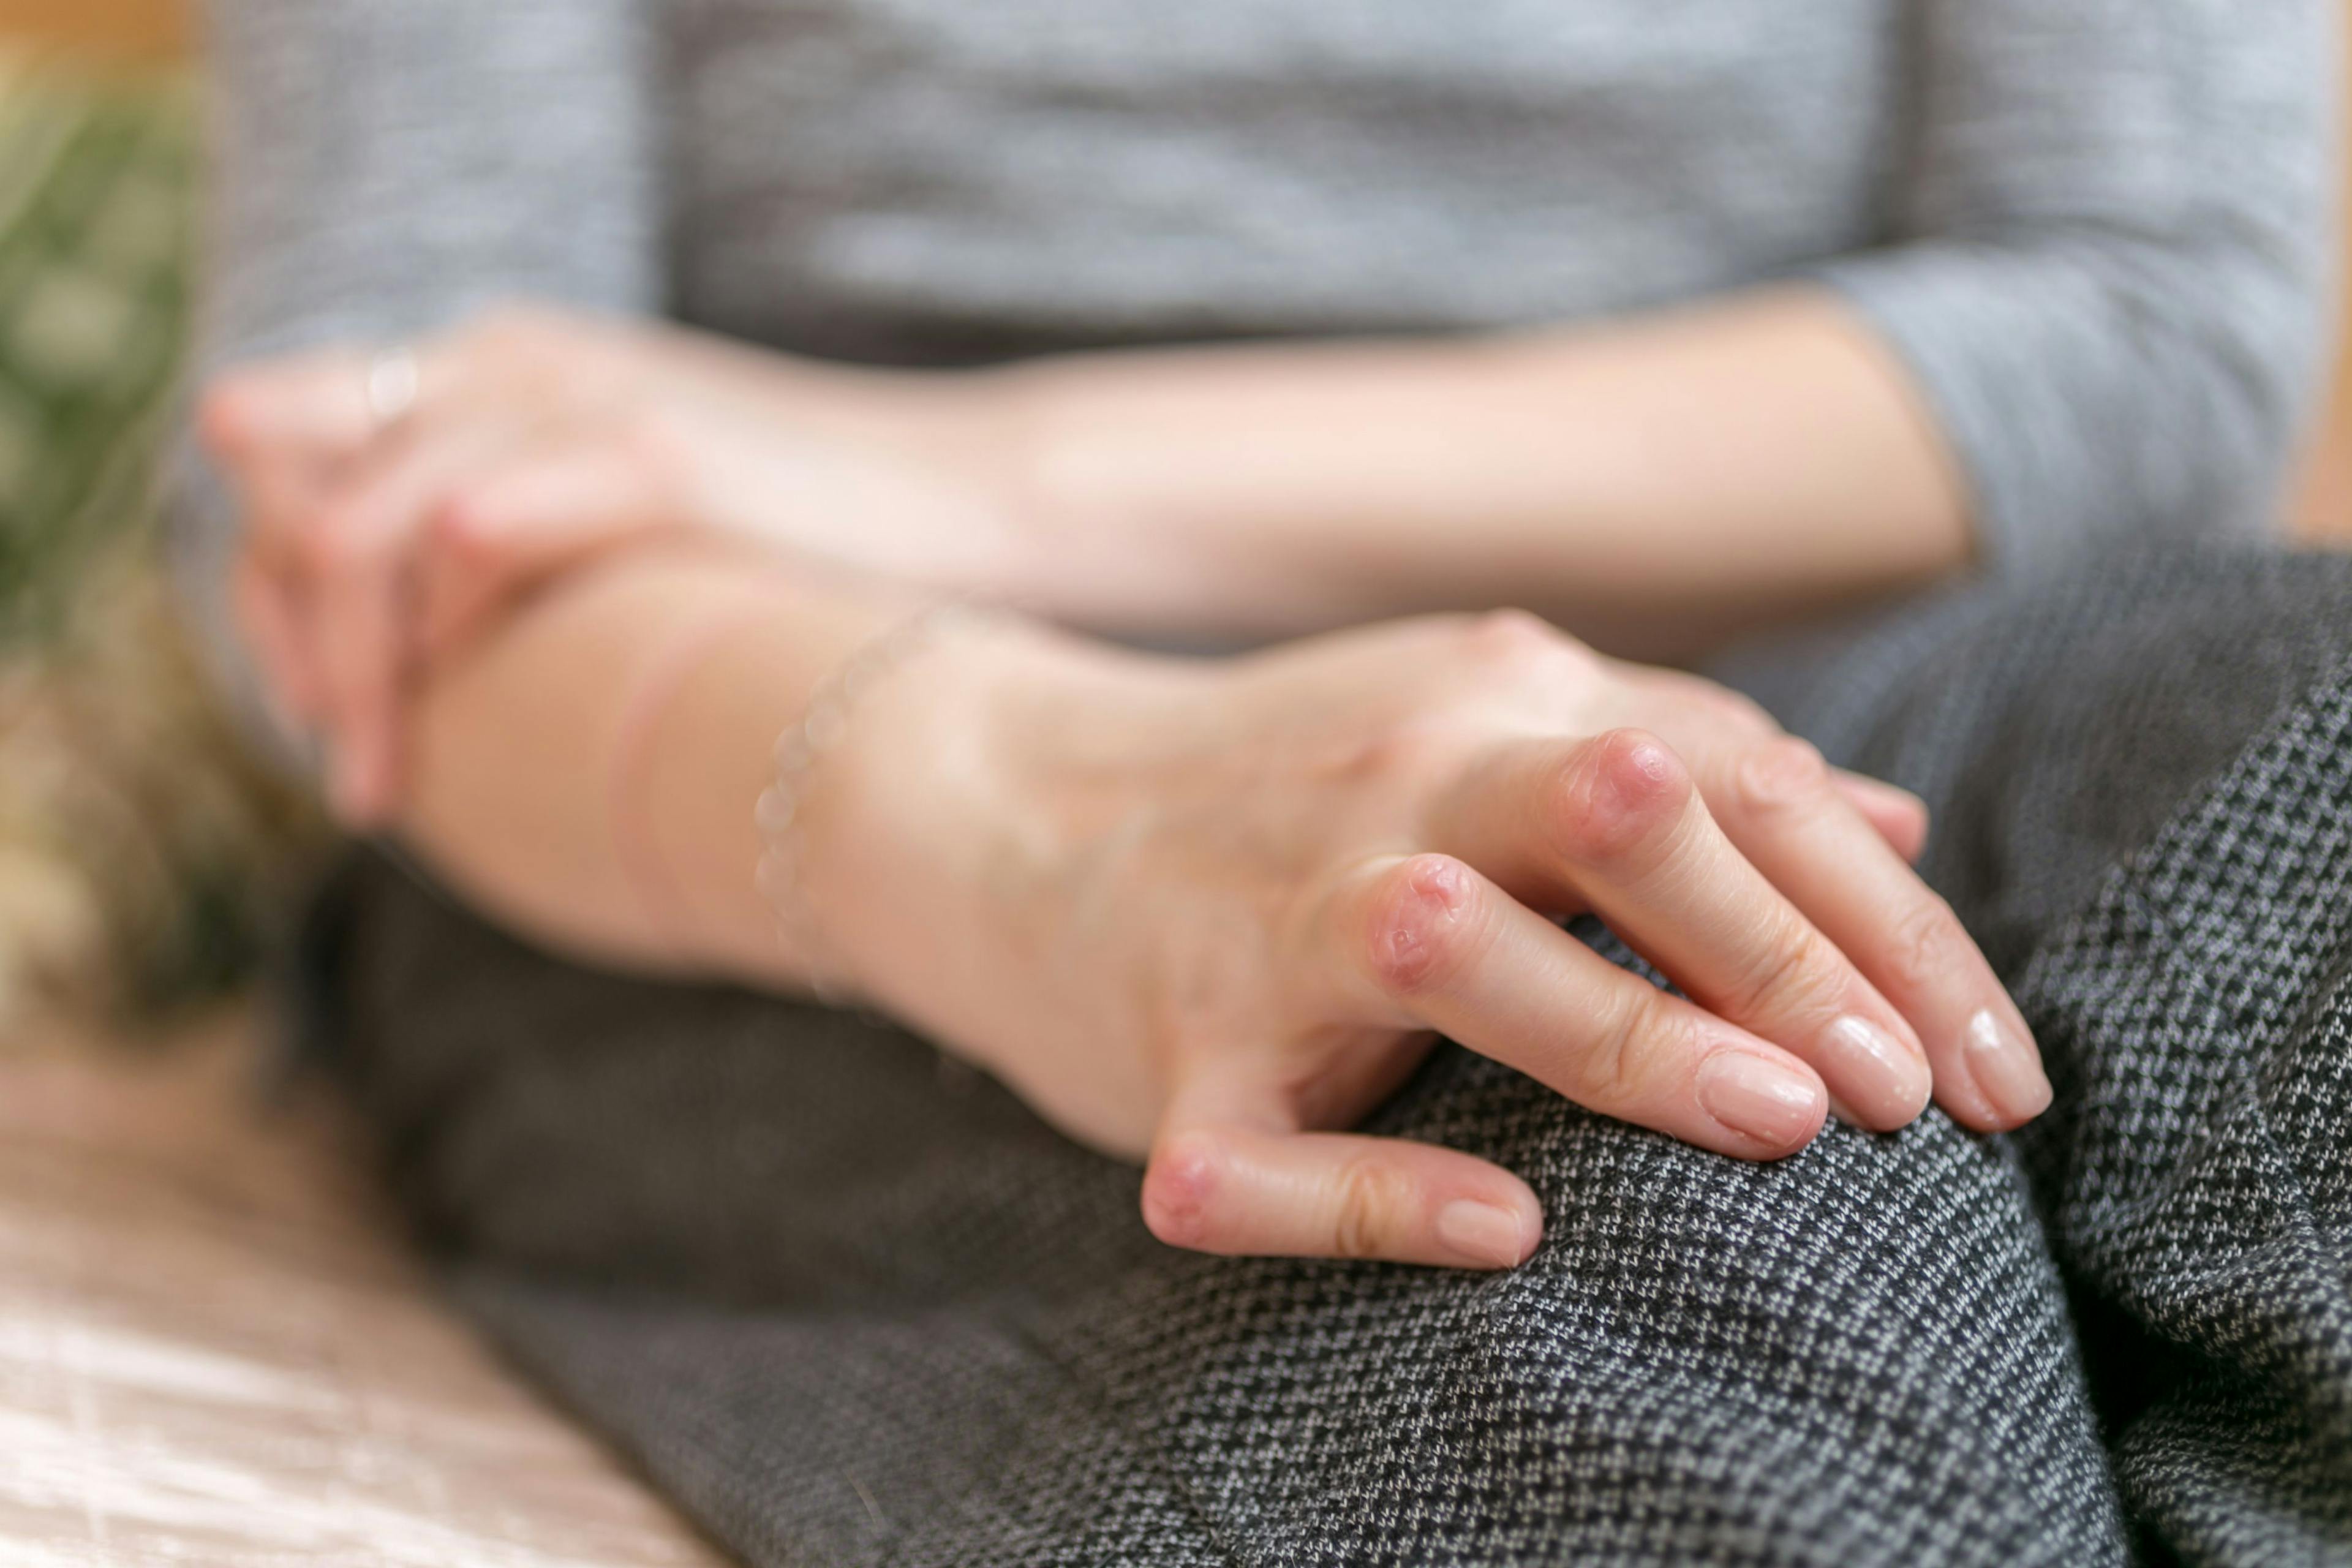 Young woman having rheumatoid arthritis takes a rest sittinng on the couch. Hands and legs are deformed. She feels pain. Selected focus. | Image Credit: © Valentina - stock.adobe.com